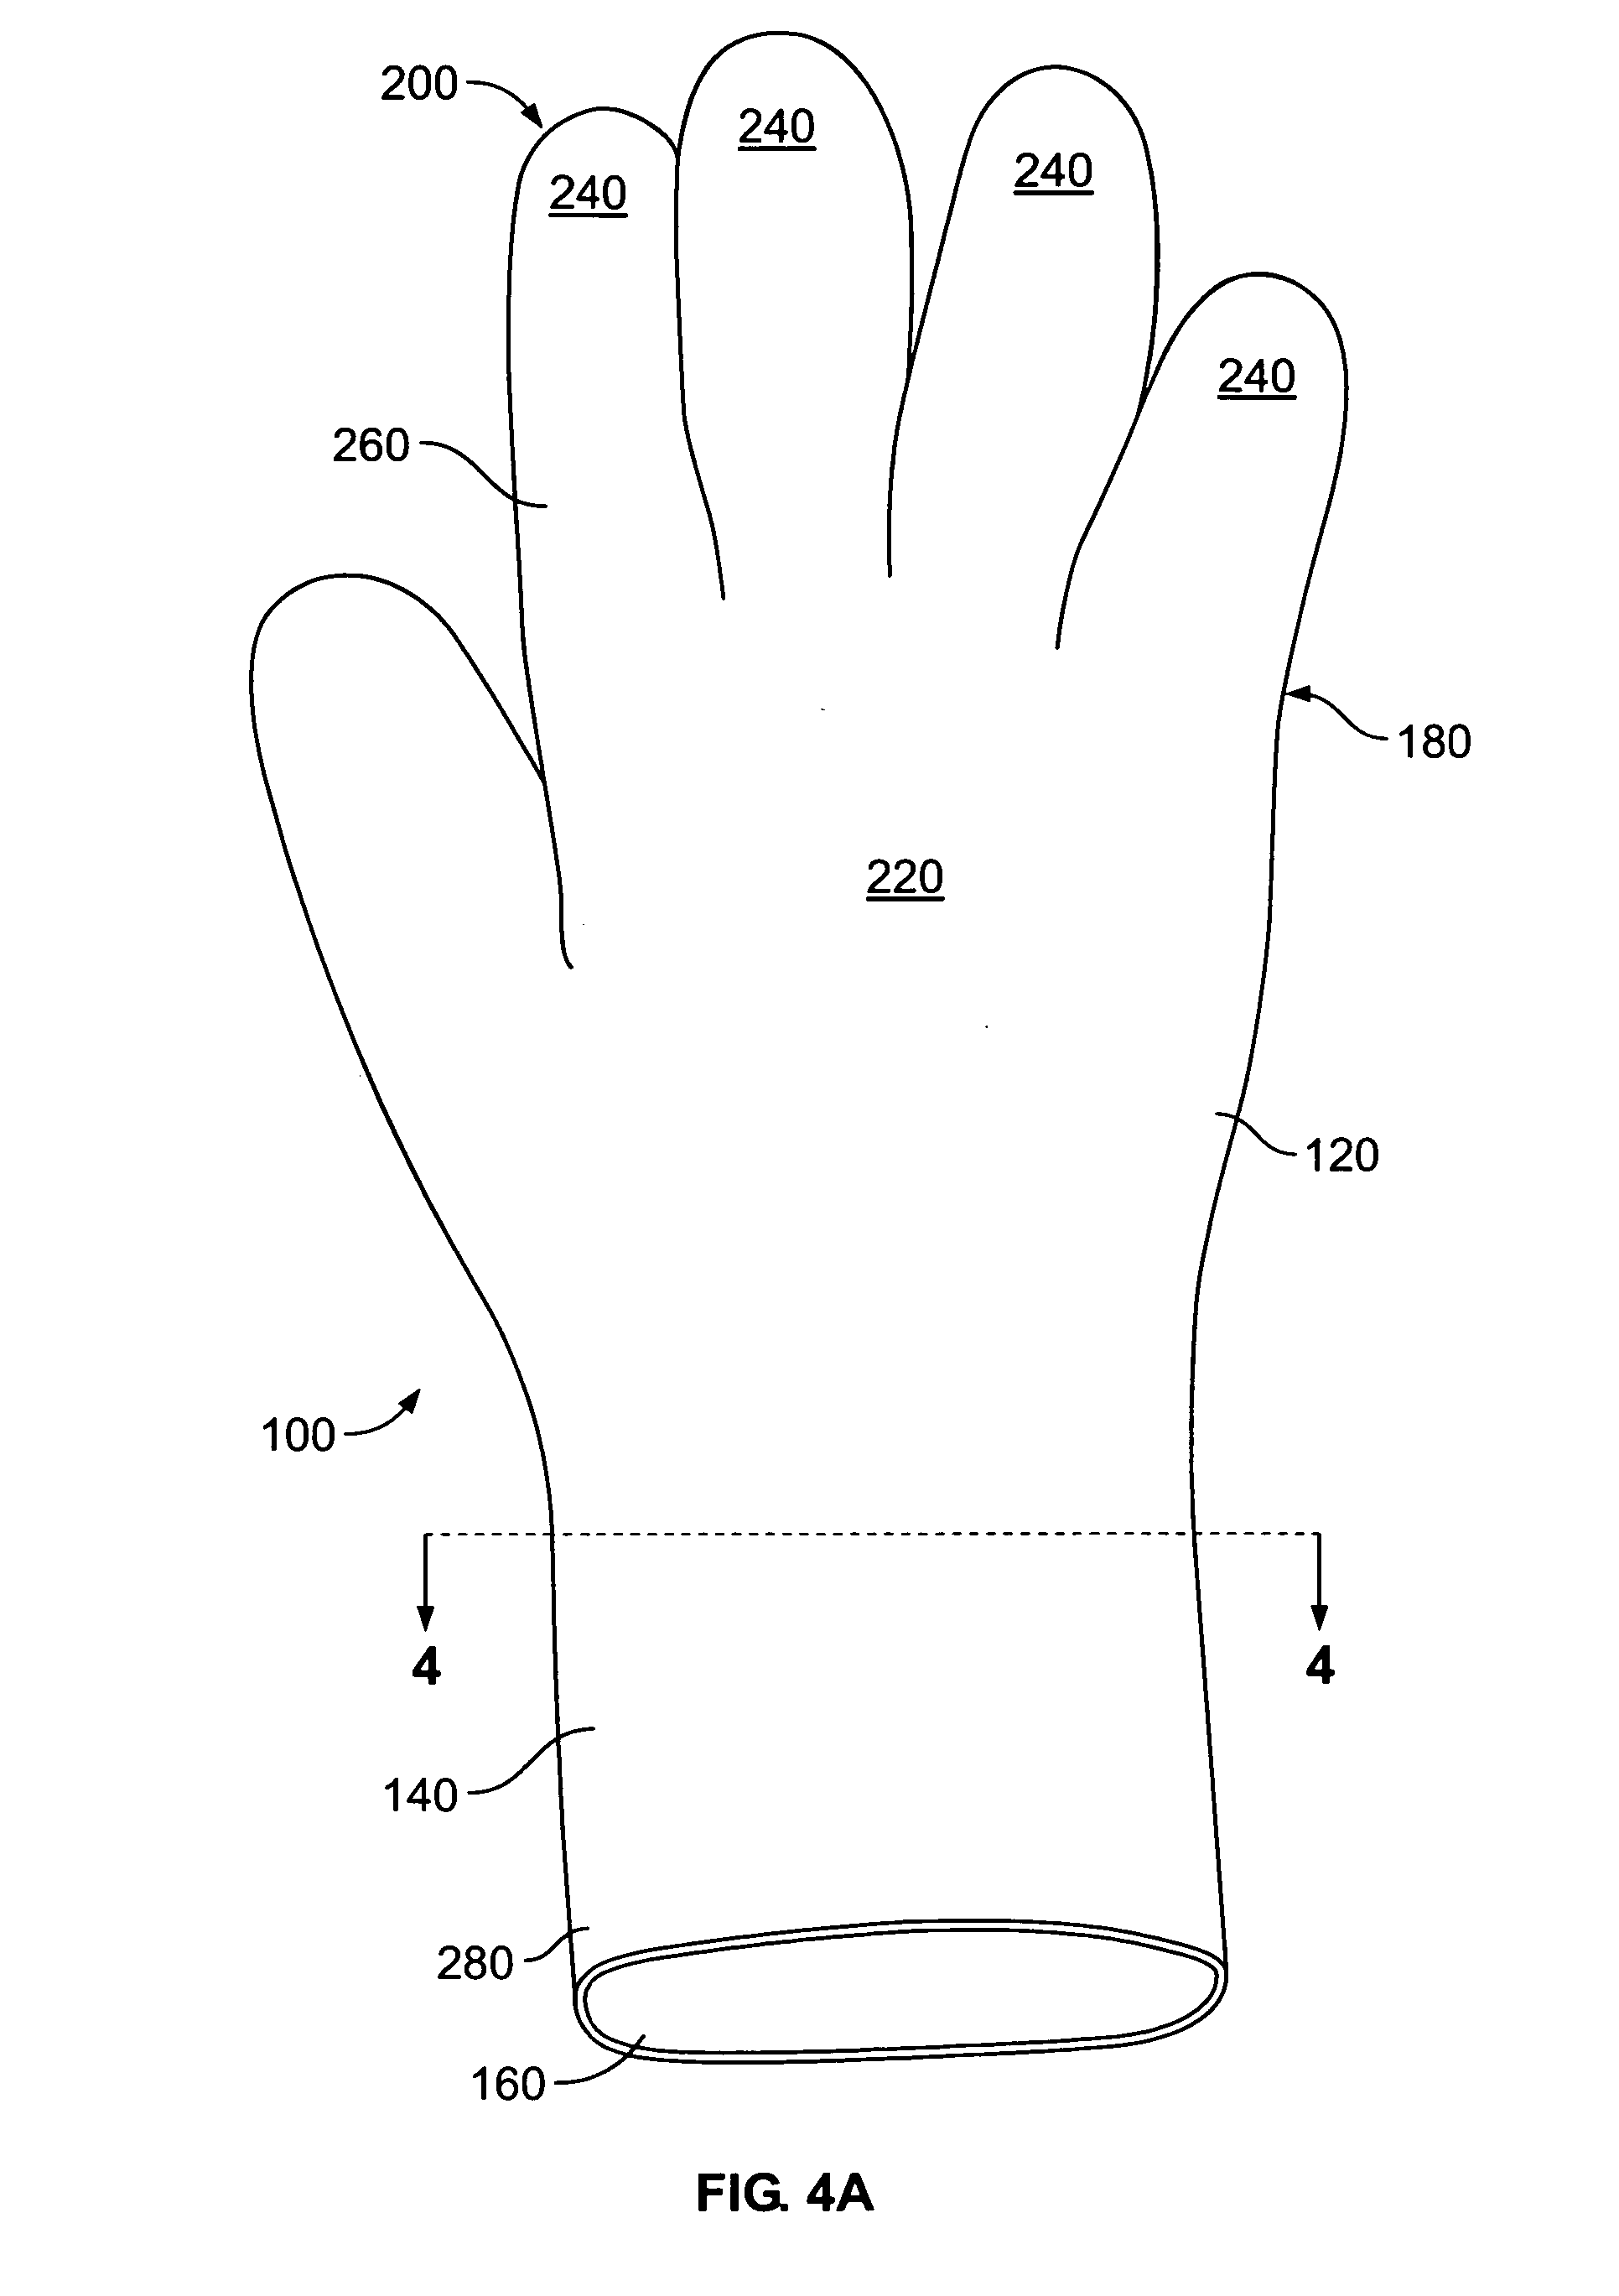 Disposable gloves